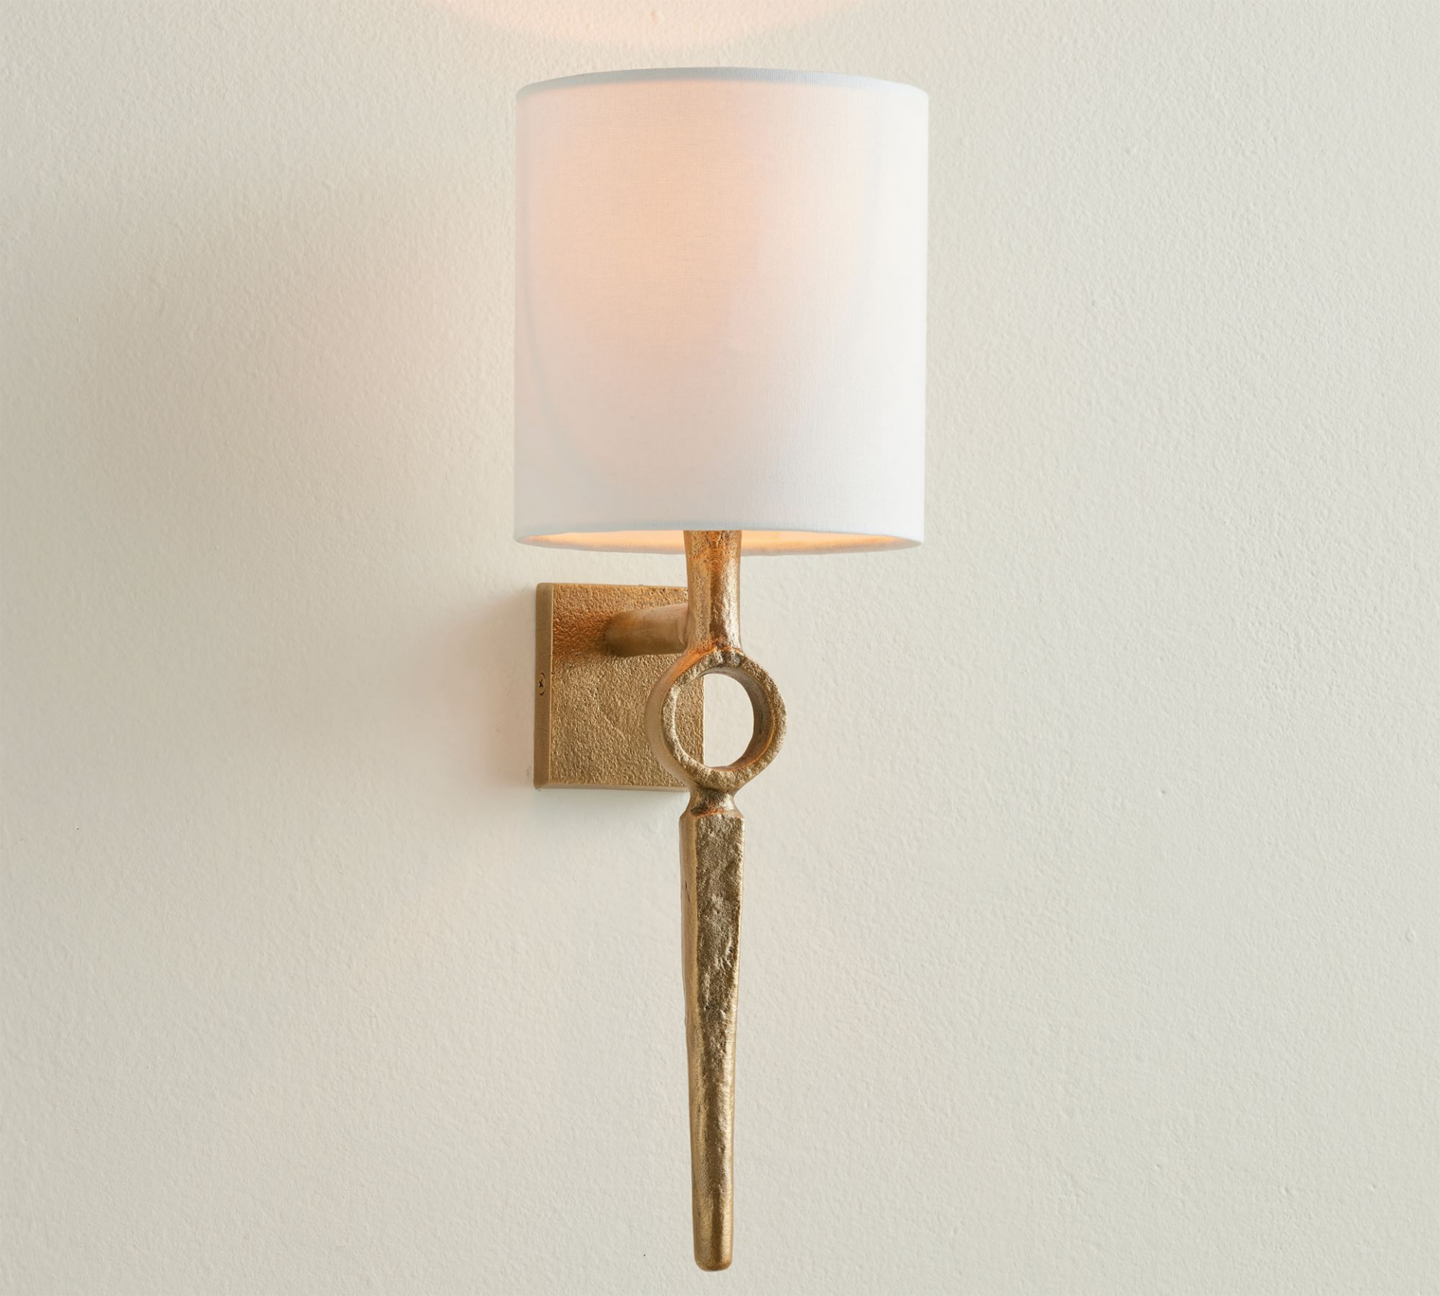 Easton Forged Iron Sconce in Antique Brass - Pottery Barn